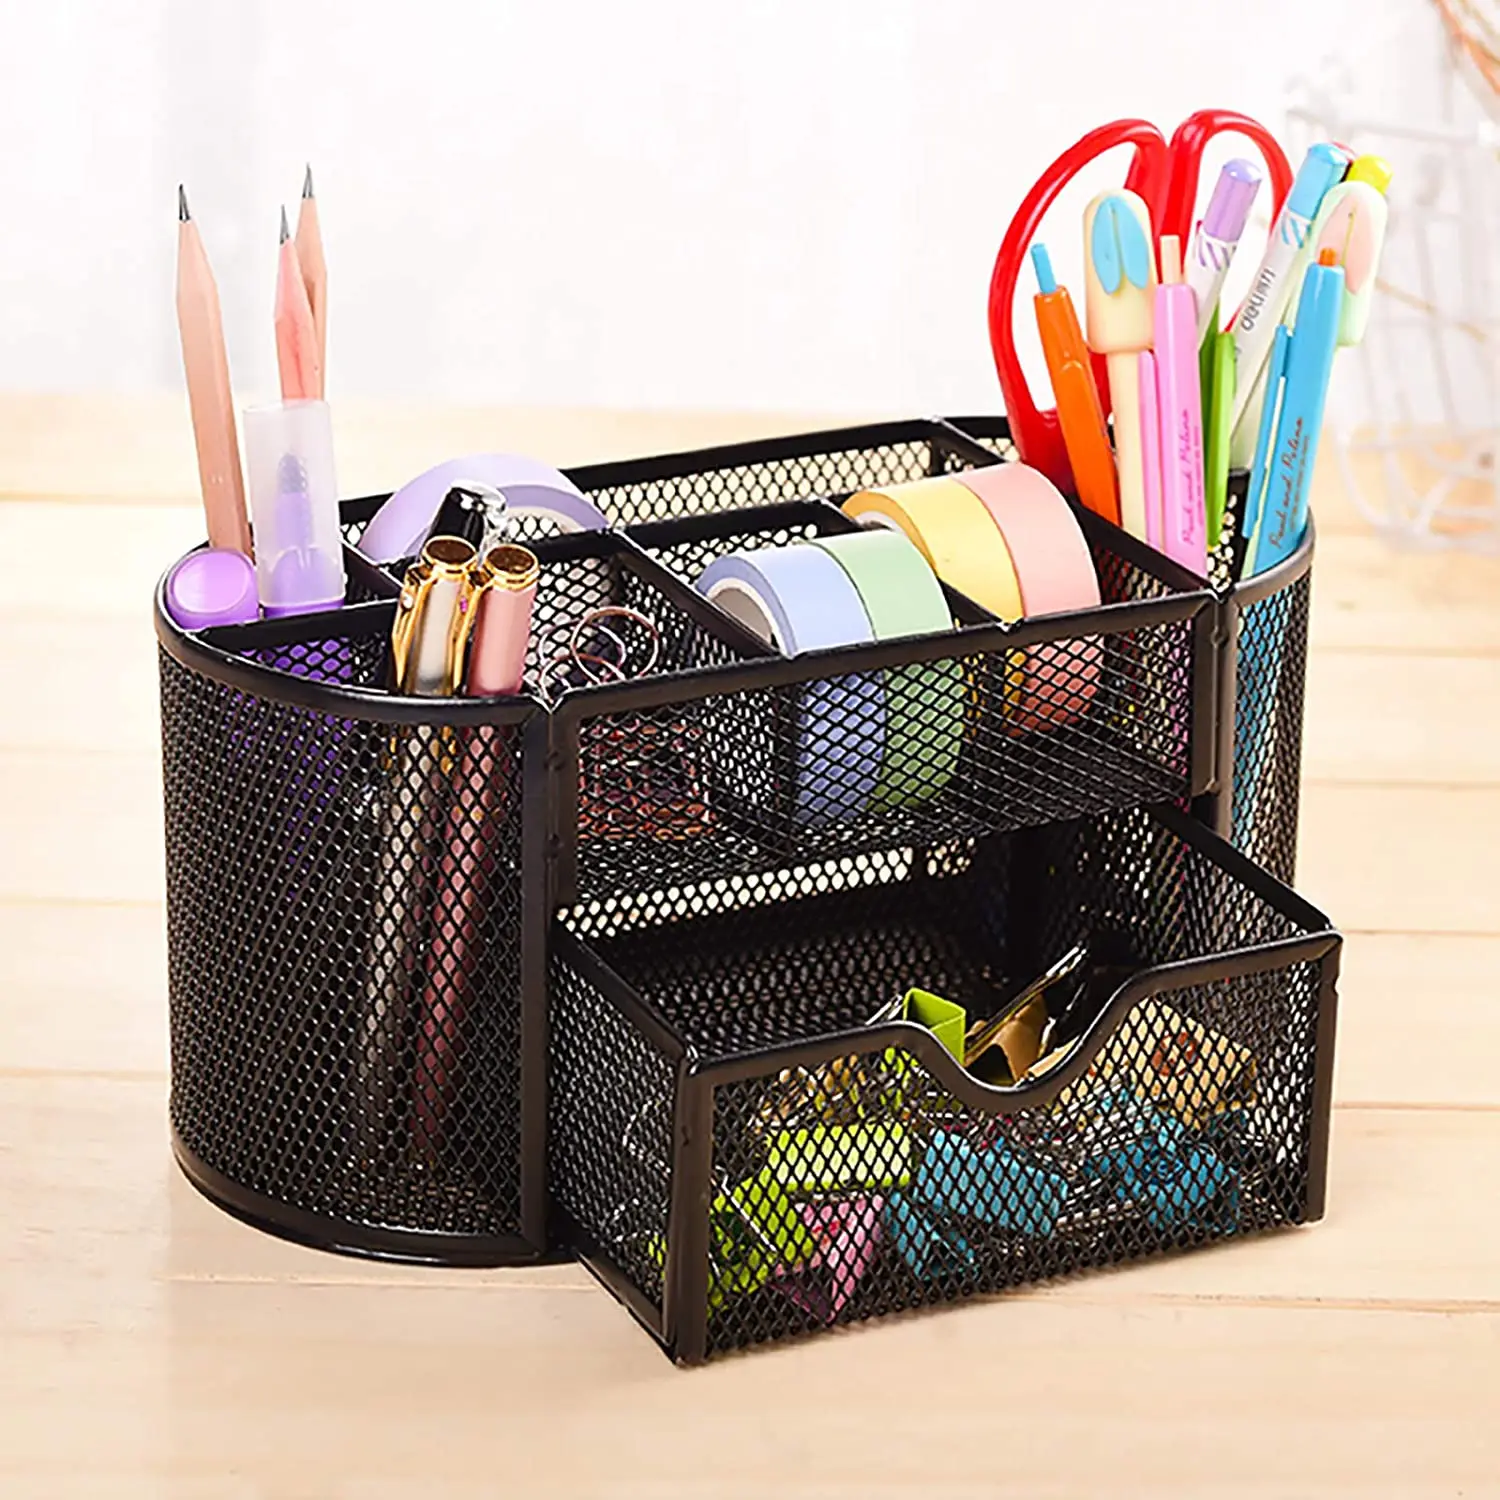 

Formwell Metal Mesh Desk Supply Caddy Desktop Office Supplies Organizer 8 Compartments with Drawer, stationery storage